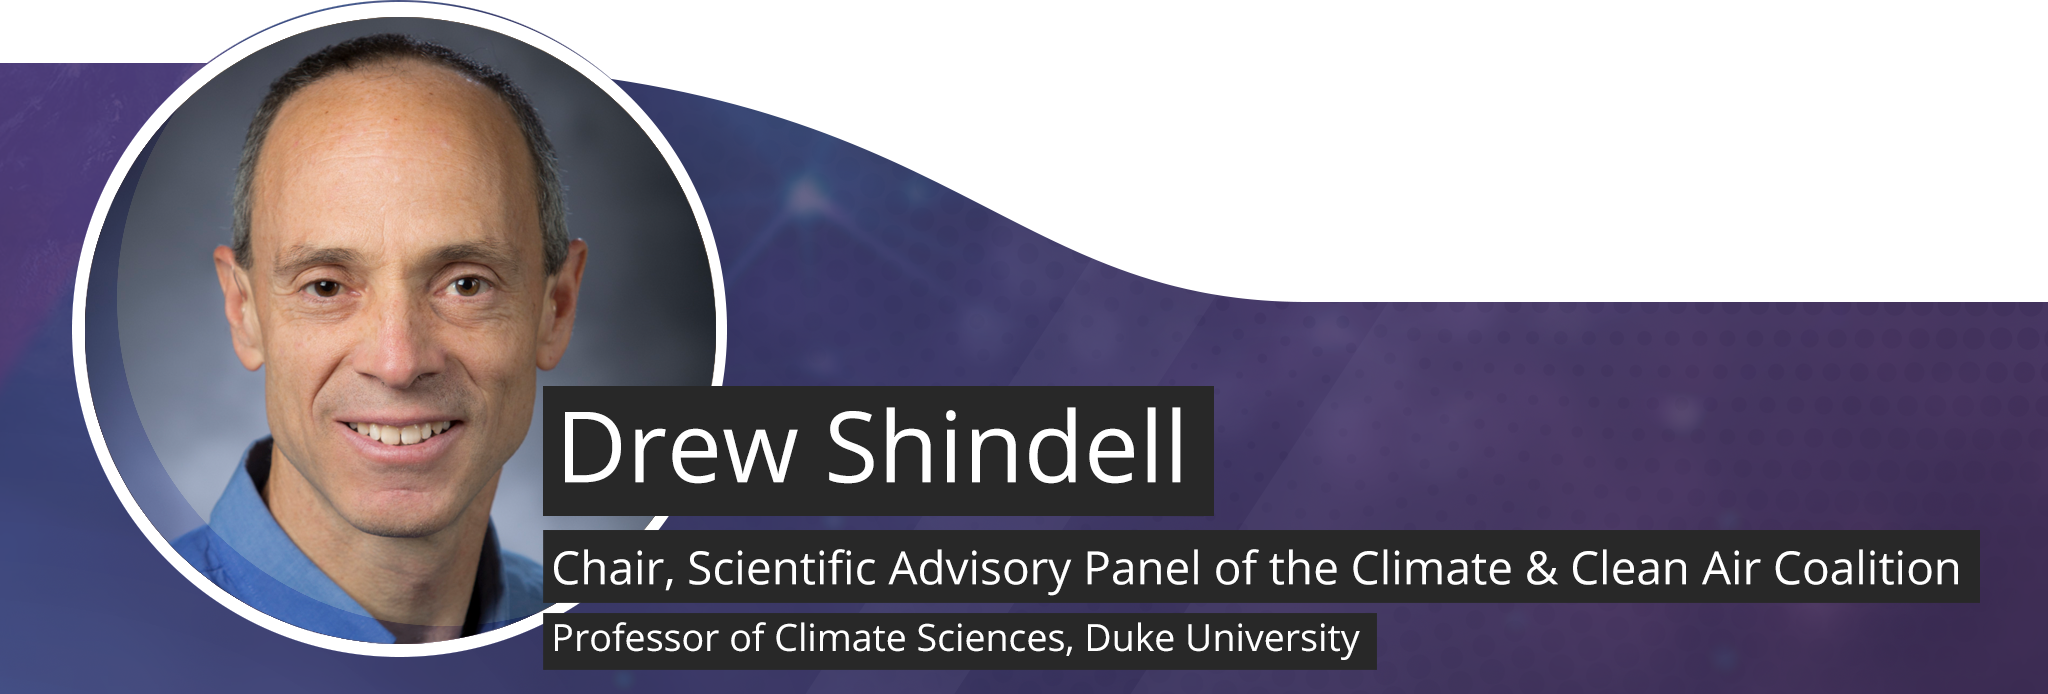 Drew Shindell, Chair, Scientific Advisory Panel of the Climate & Clean Air Coalition and Professor of Climate Sciences, Duke University